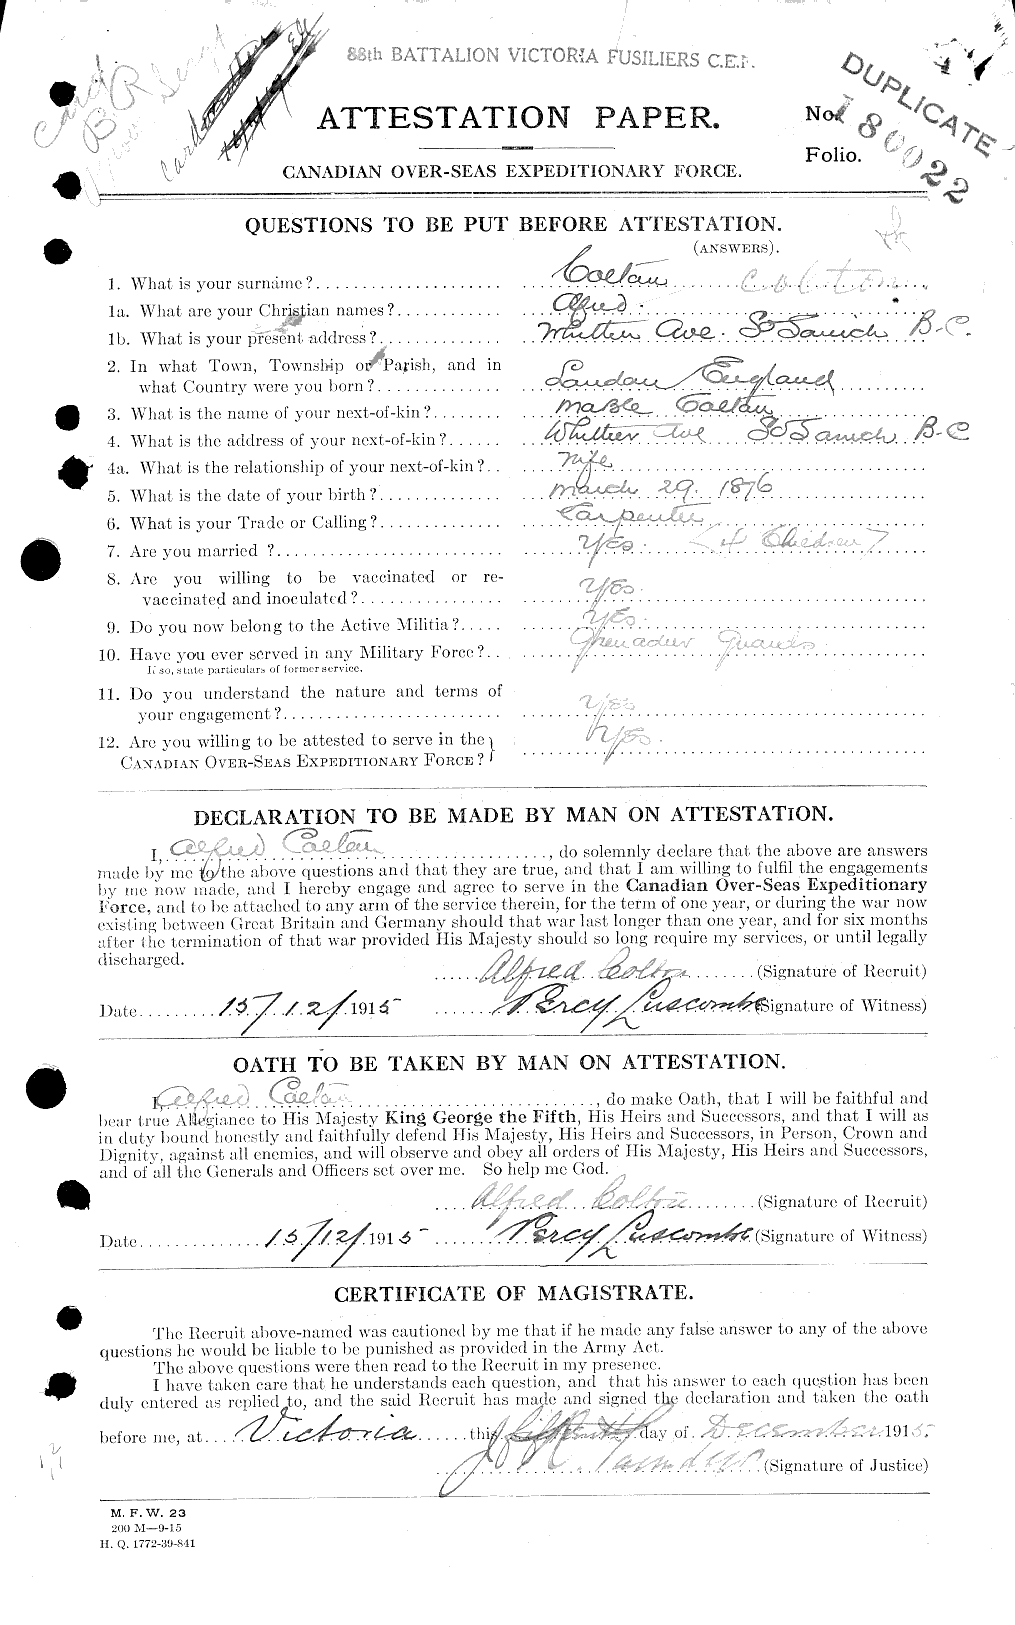 Personnel Records of the First World War - CEF 042432a